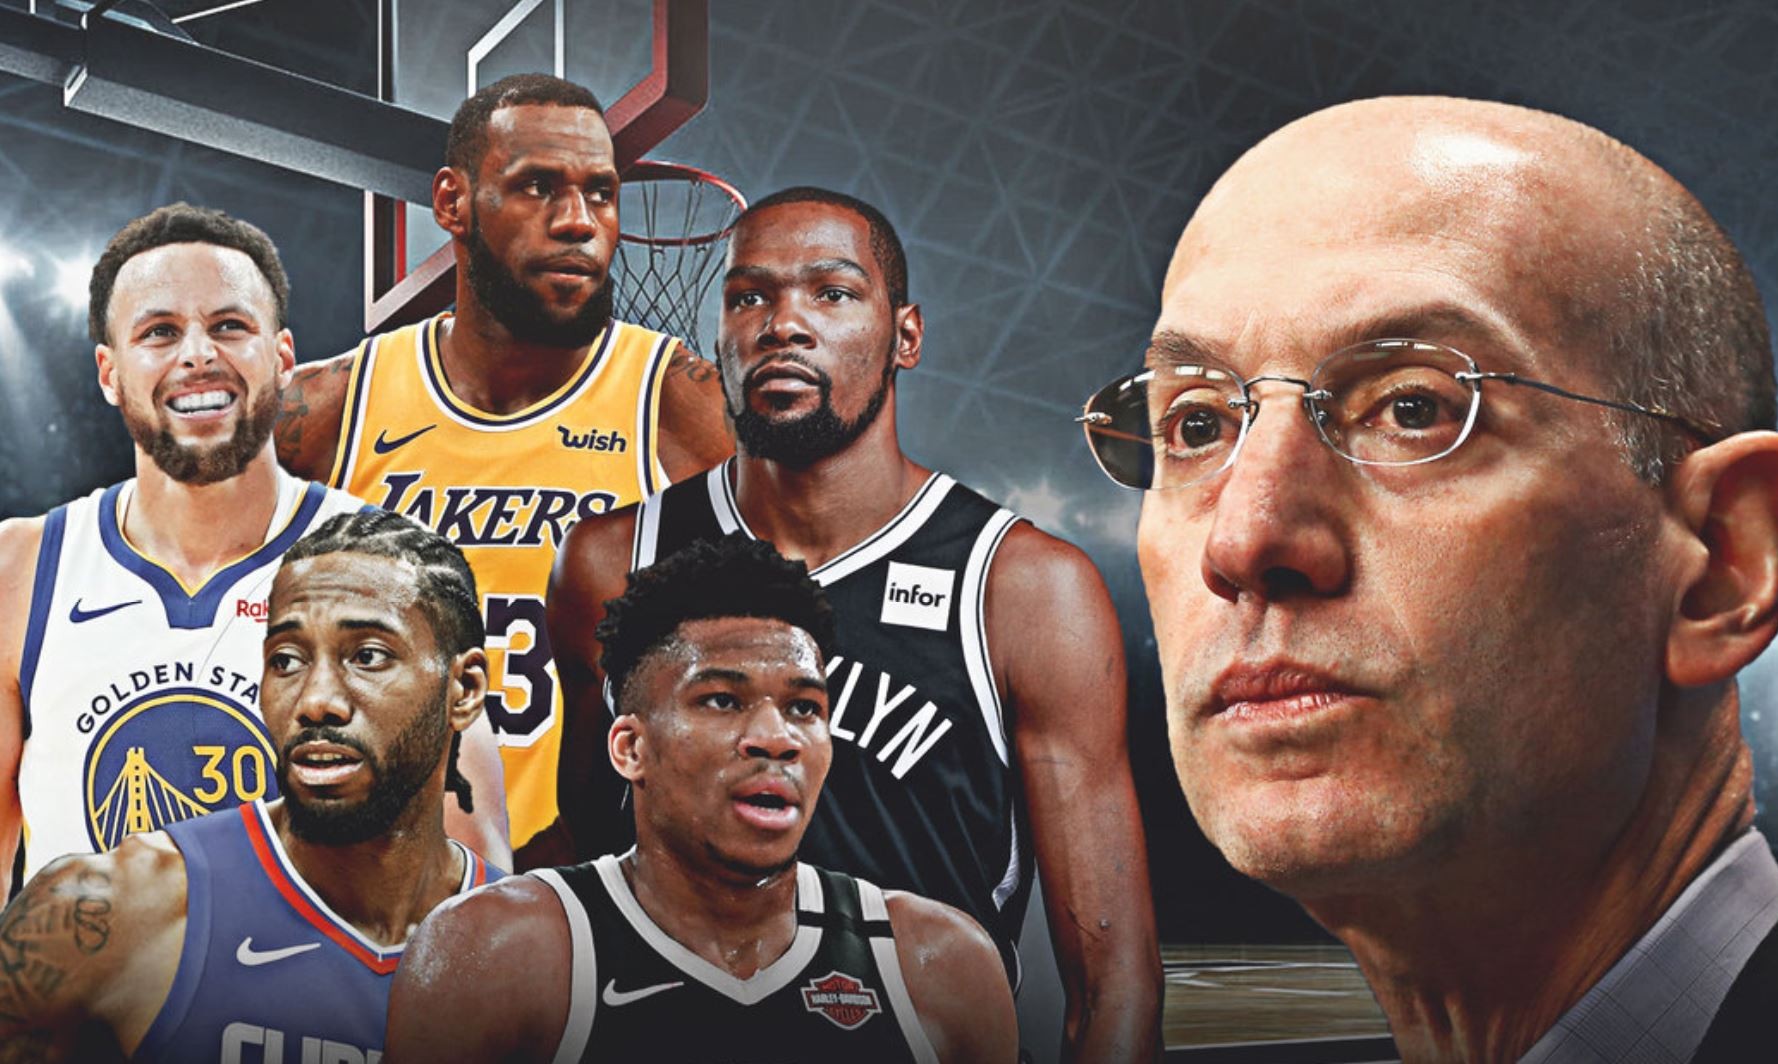 The Future of the NBA Is On the Line. Just What is Adam Silver Going to Do?